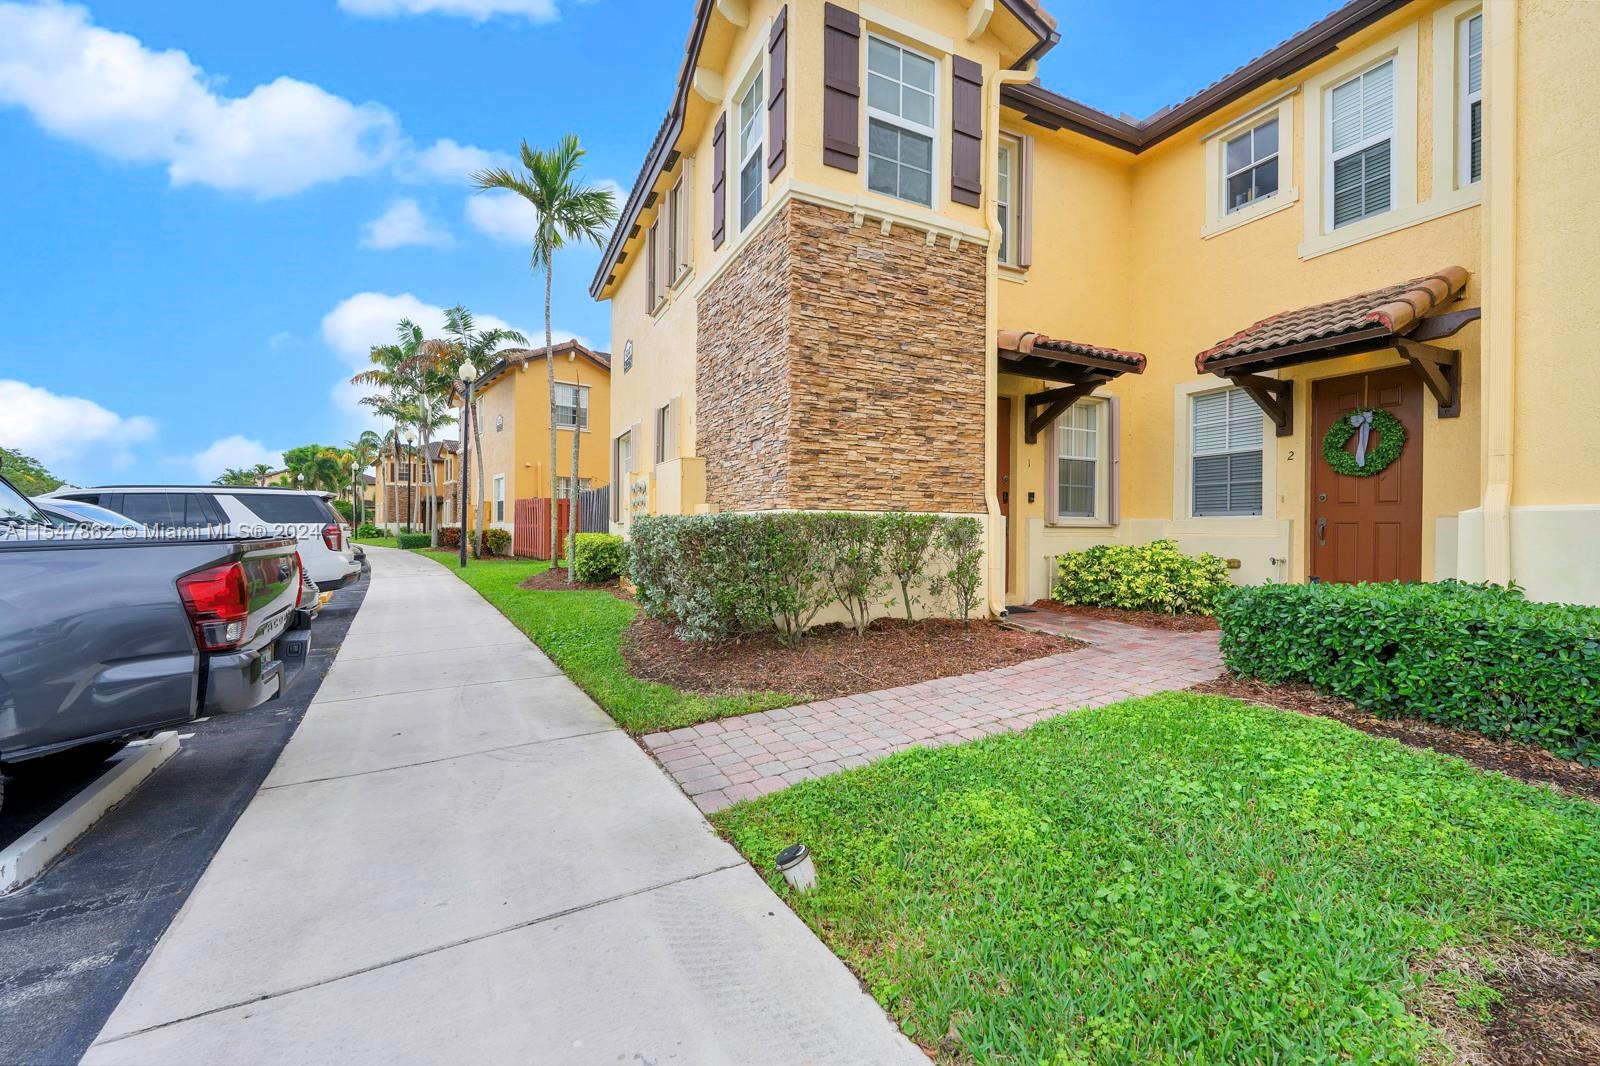 Welcome to your dream home in the prestigious Isles at Bayshore community of Cutler Bay! This beautiful 3-bedroom, 2-bathroom townhouse offers an ideal blend of comfort and convenience.
Floors downstairs for easy maintenance laminate flooring upstairs for a cozy ambiance
air conditioning, fridge, washer, and dryer - all less than 3 years old
Enjoy peace of mind with 24/7 guard gated security,Dive into luxury with a resort-style clubhouse
Experience leisure at the Olympic-size pool,Relaxation awaits at the sauna
Stay fit at the well-equipped fitness centerConvenient business center for your work needs
Kids' play area for endless entertainment.Ideally situated near the Florida Turnpike, Black Point Marina, and shopping on Old Cutler Road